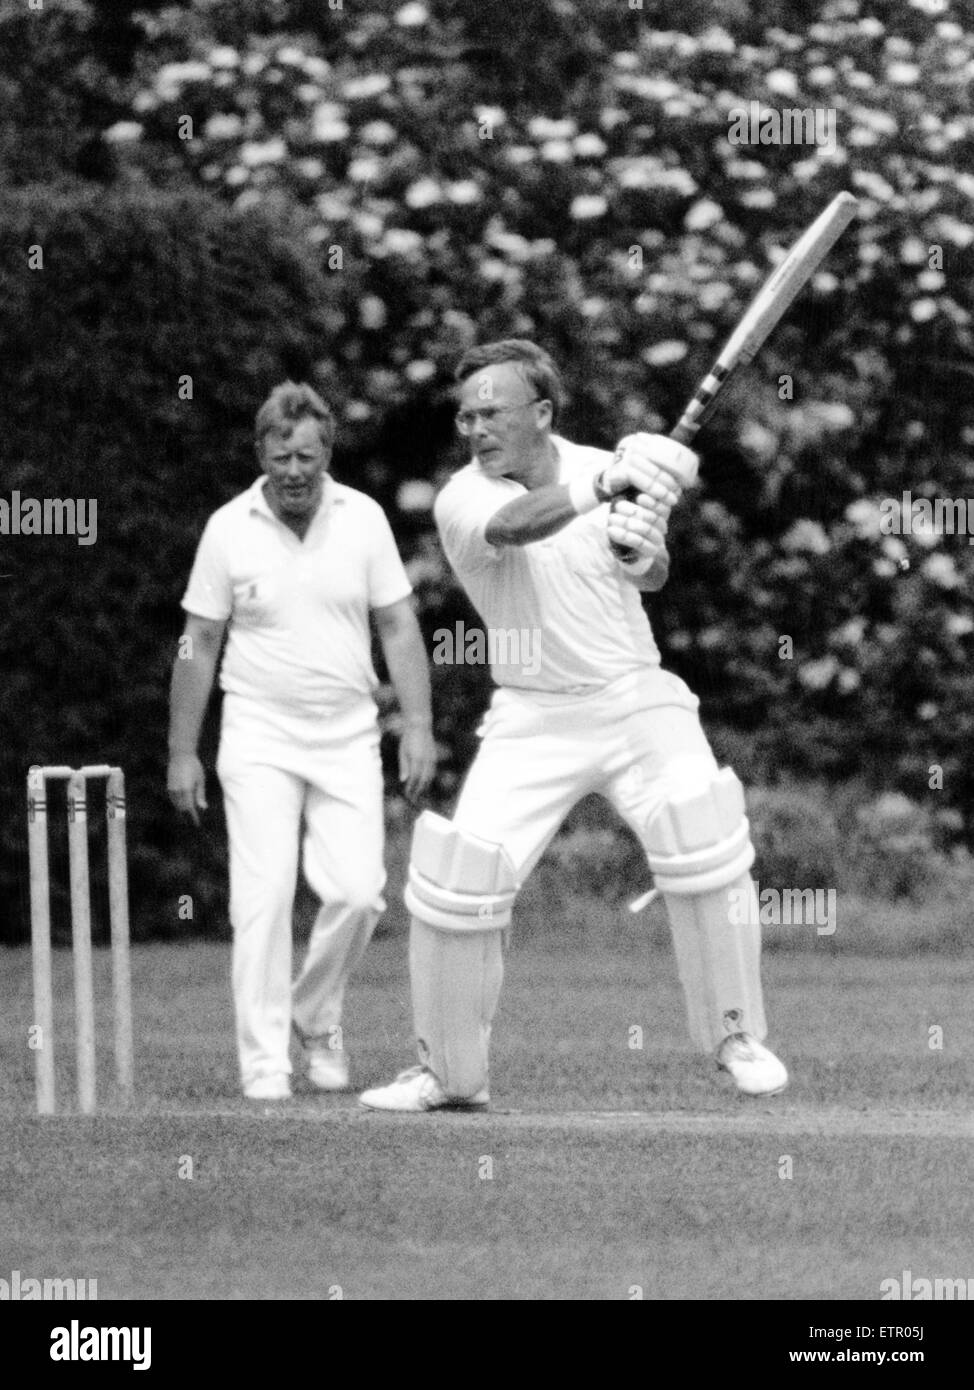 Leamington Vs Coventry & North Warwickshire. Leamington's Peter Beddoes hits out. 12th June 1992. Stock Photo